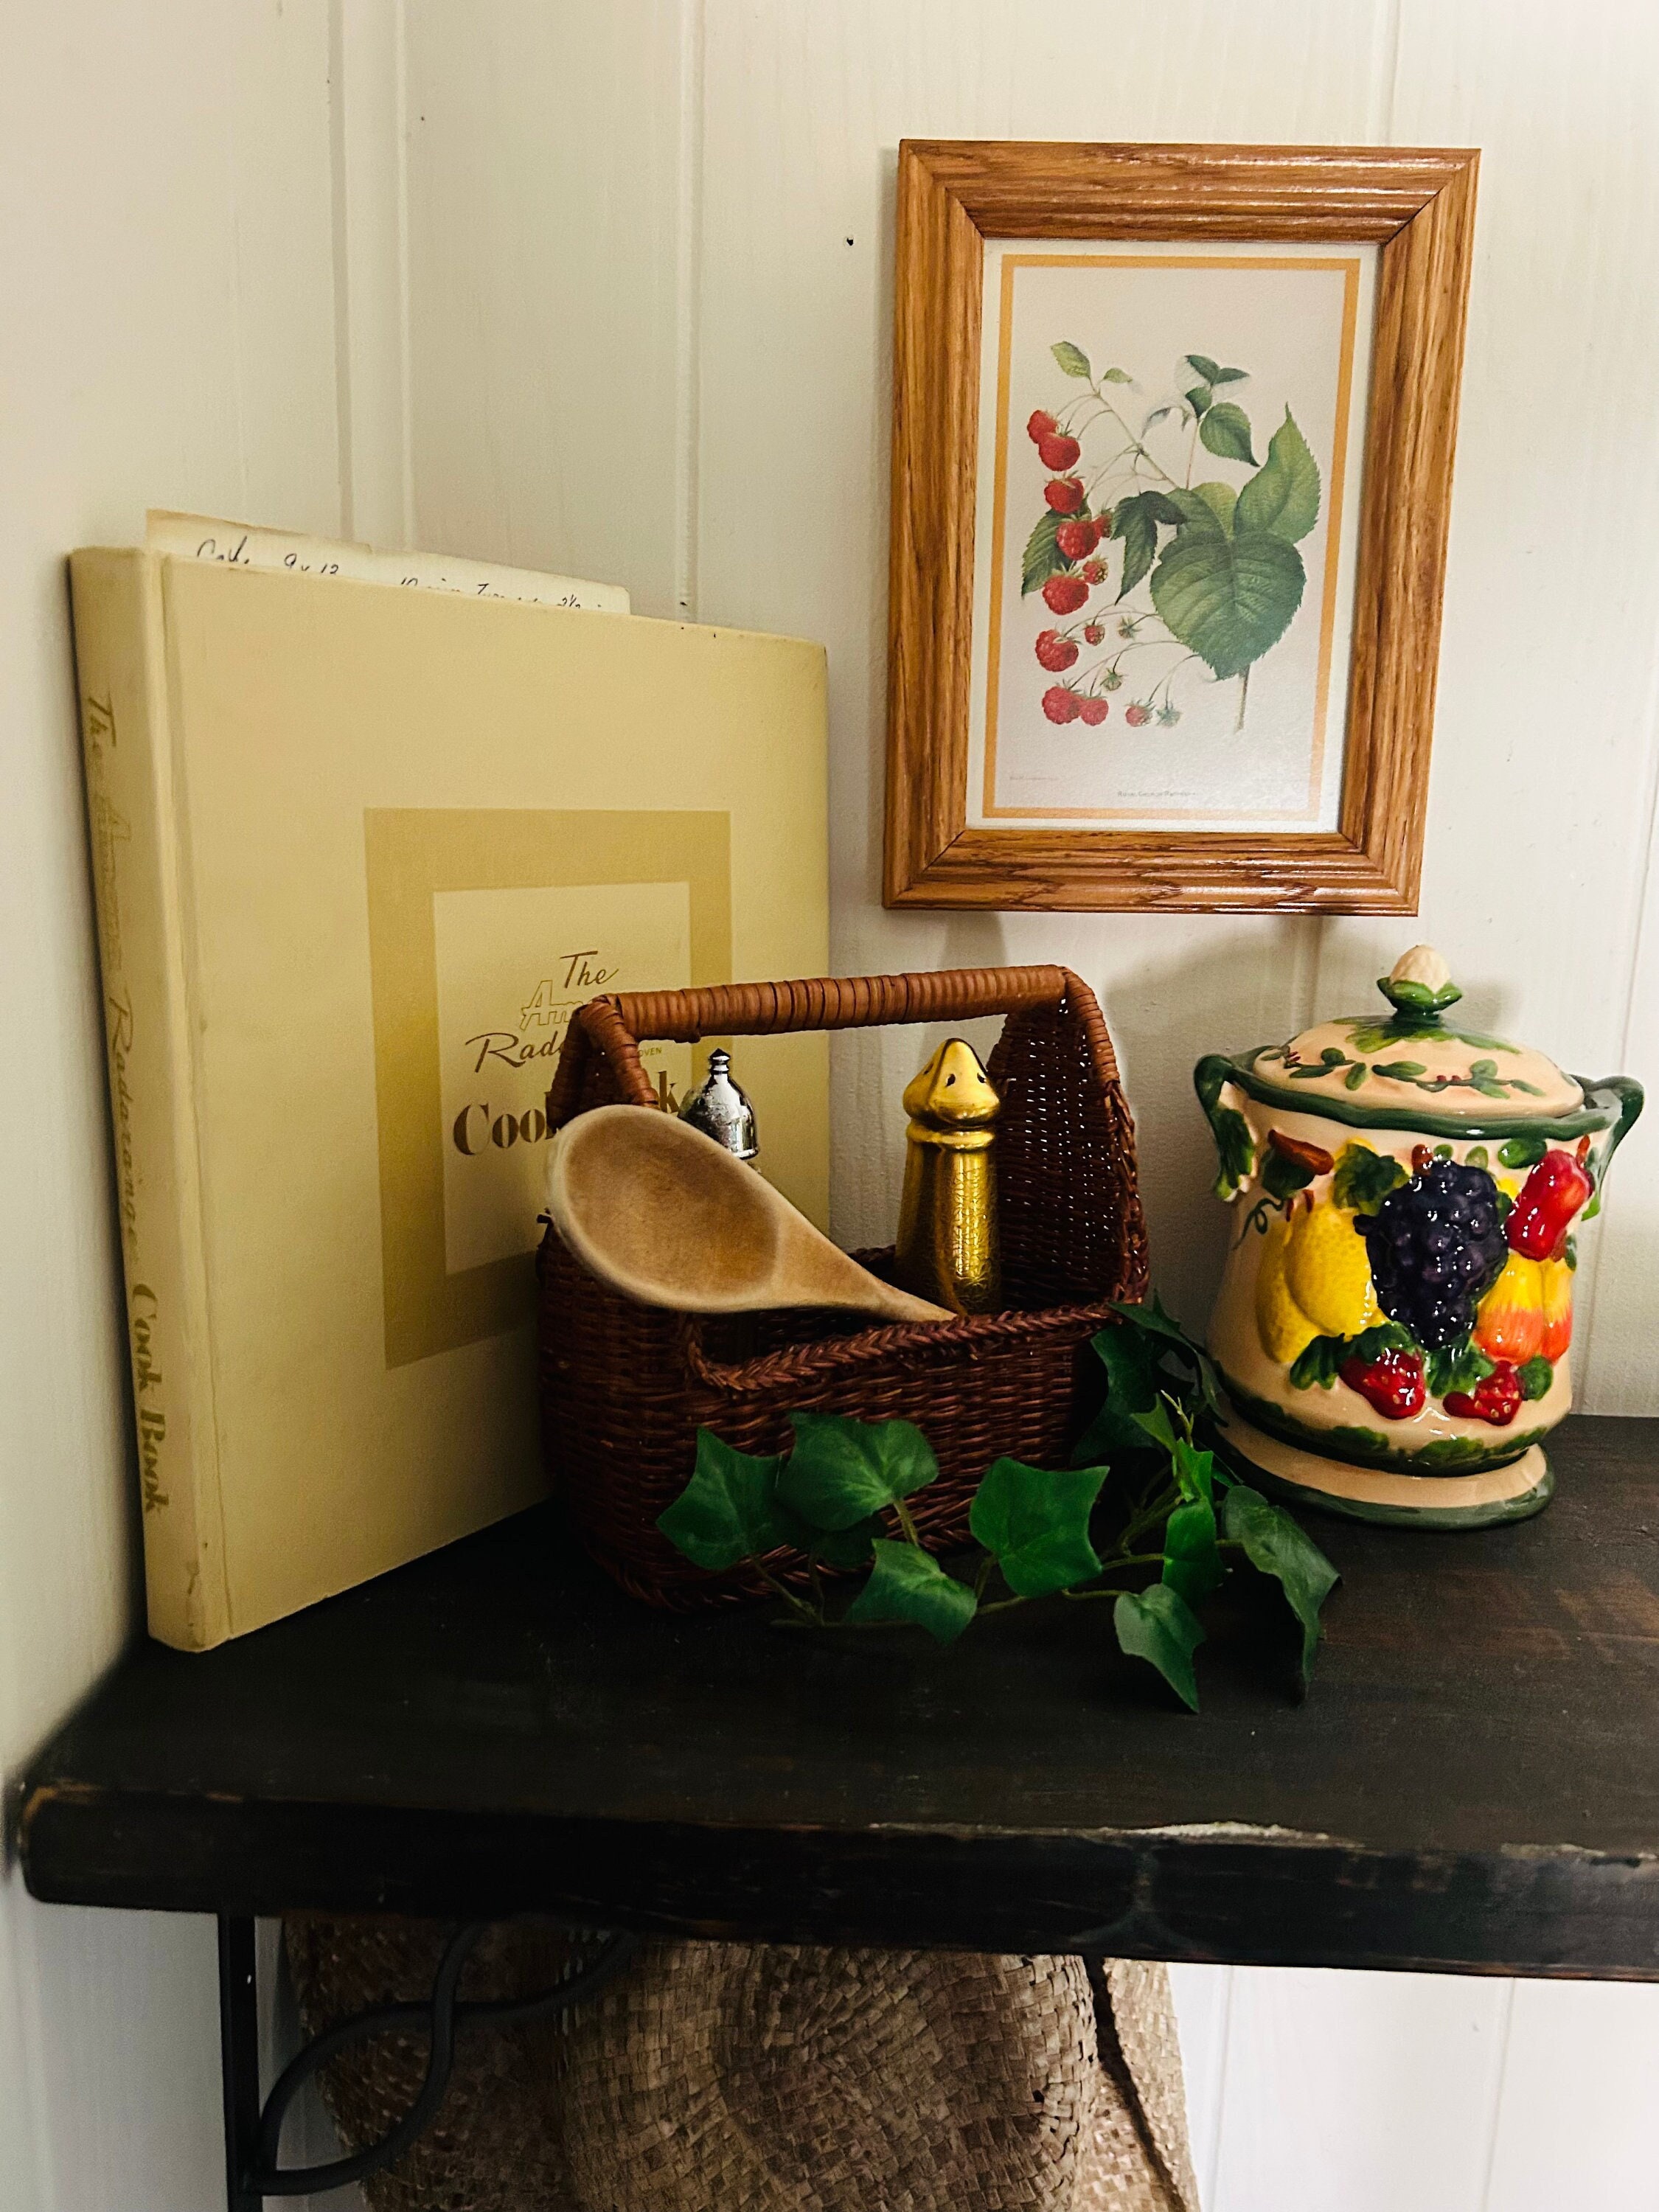 Cabinet Caddy SNAP! makes a great gift this Holiday Season🎅🎄🎁  #inspiredproducts #cabinetcaddysnap #musthaves #finds  #kitchen #clutterfree #cleaningmotivation, Inspired Products, Inspired Products · Original audio